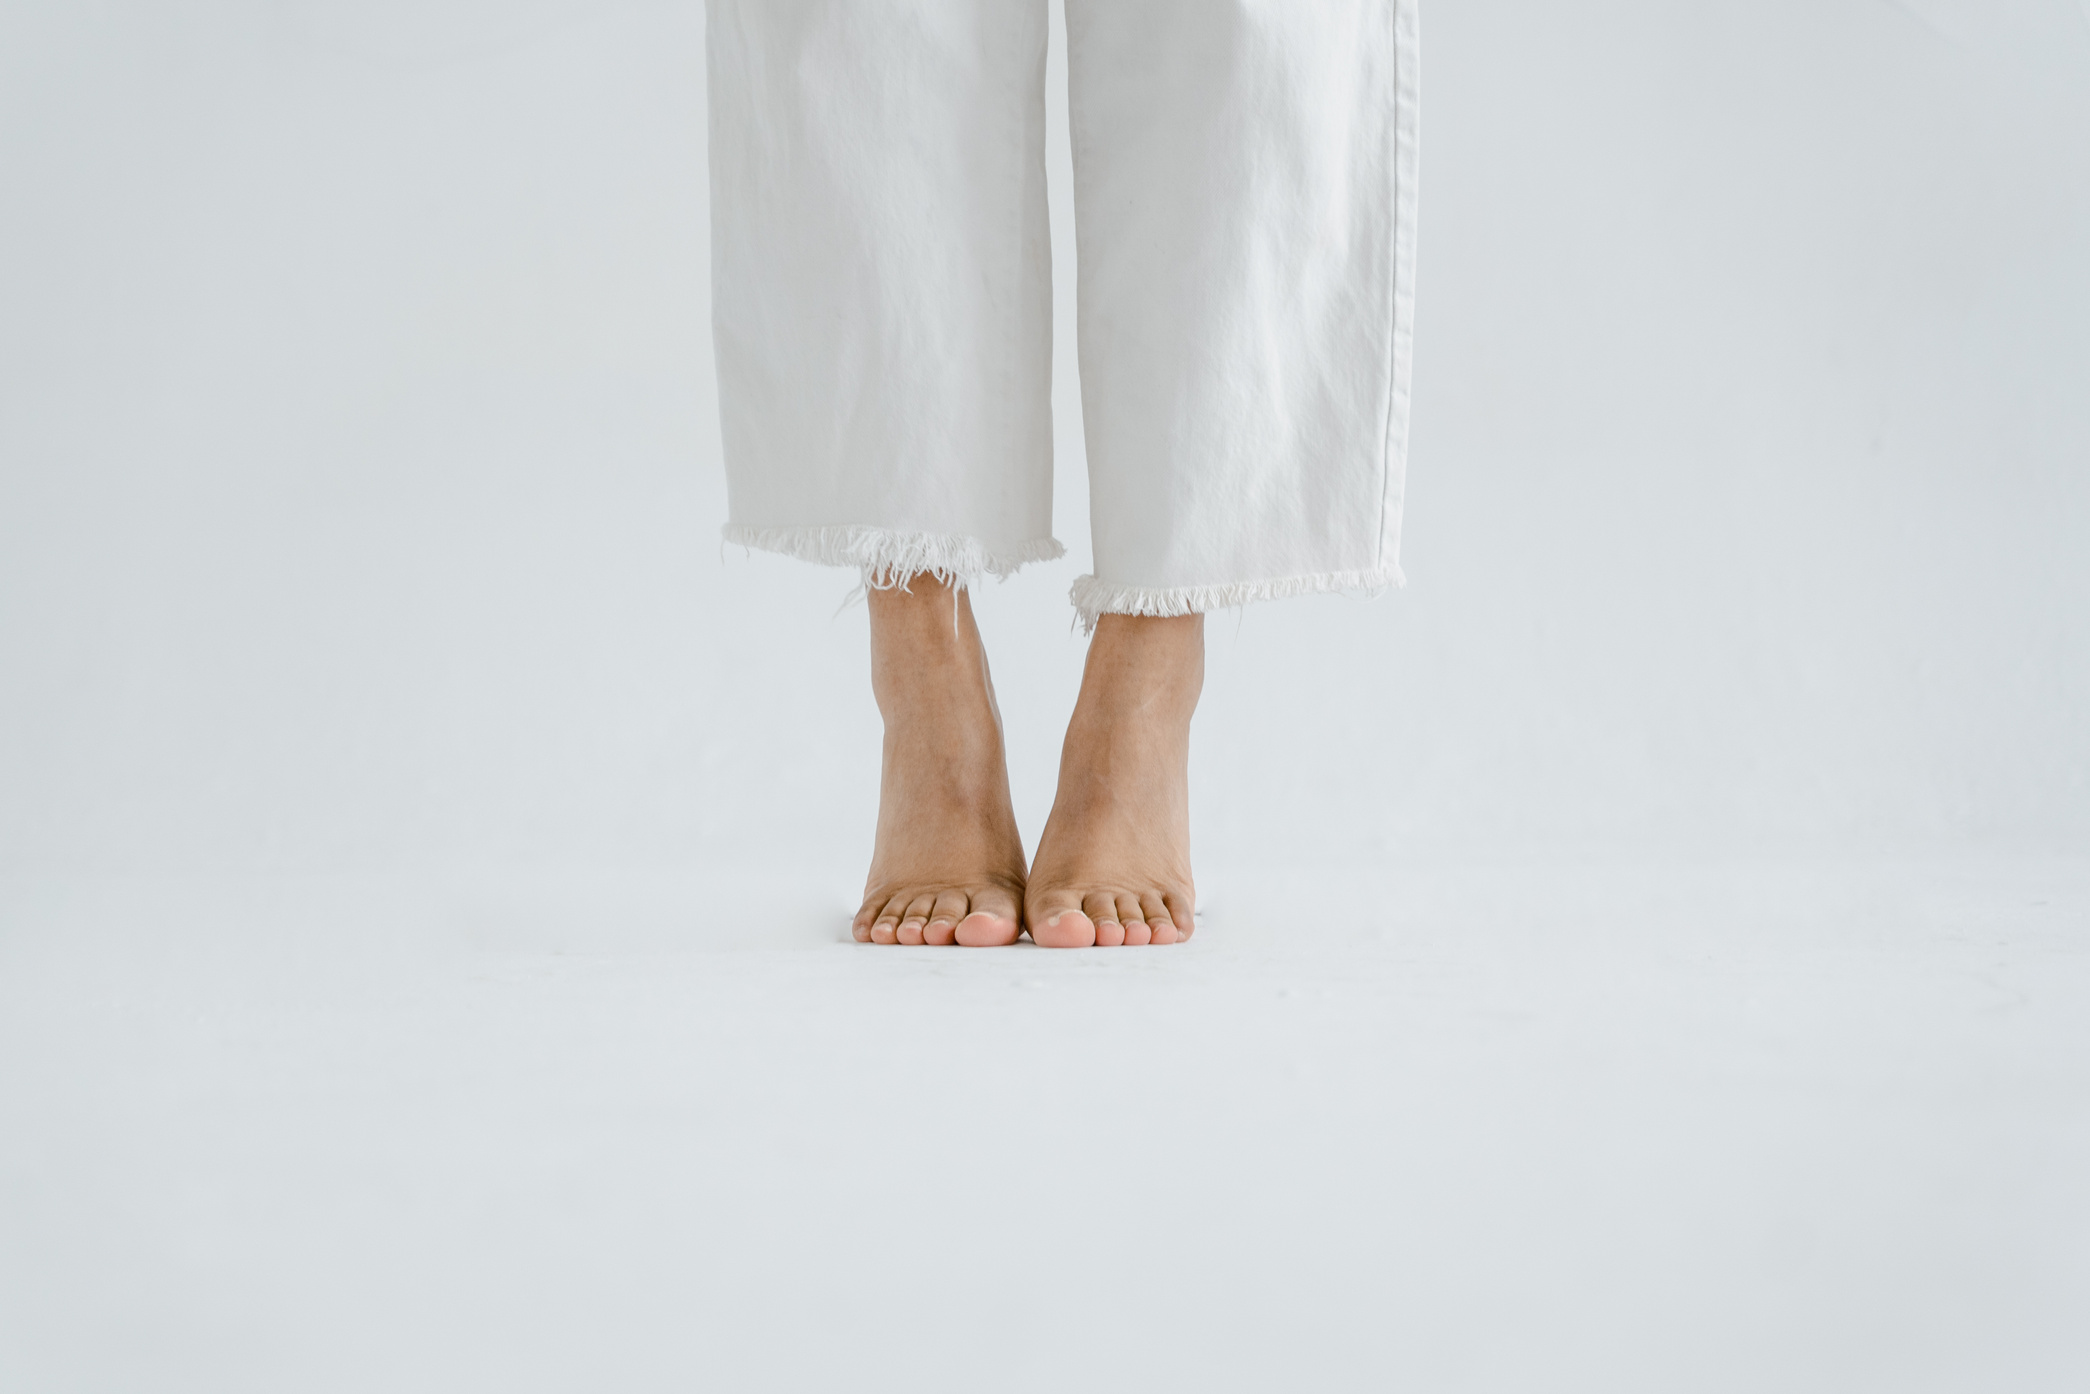 A Barefooted Person Wearing White Pants Tiptoeing